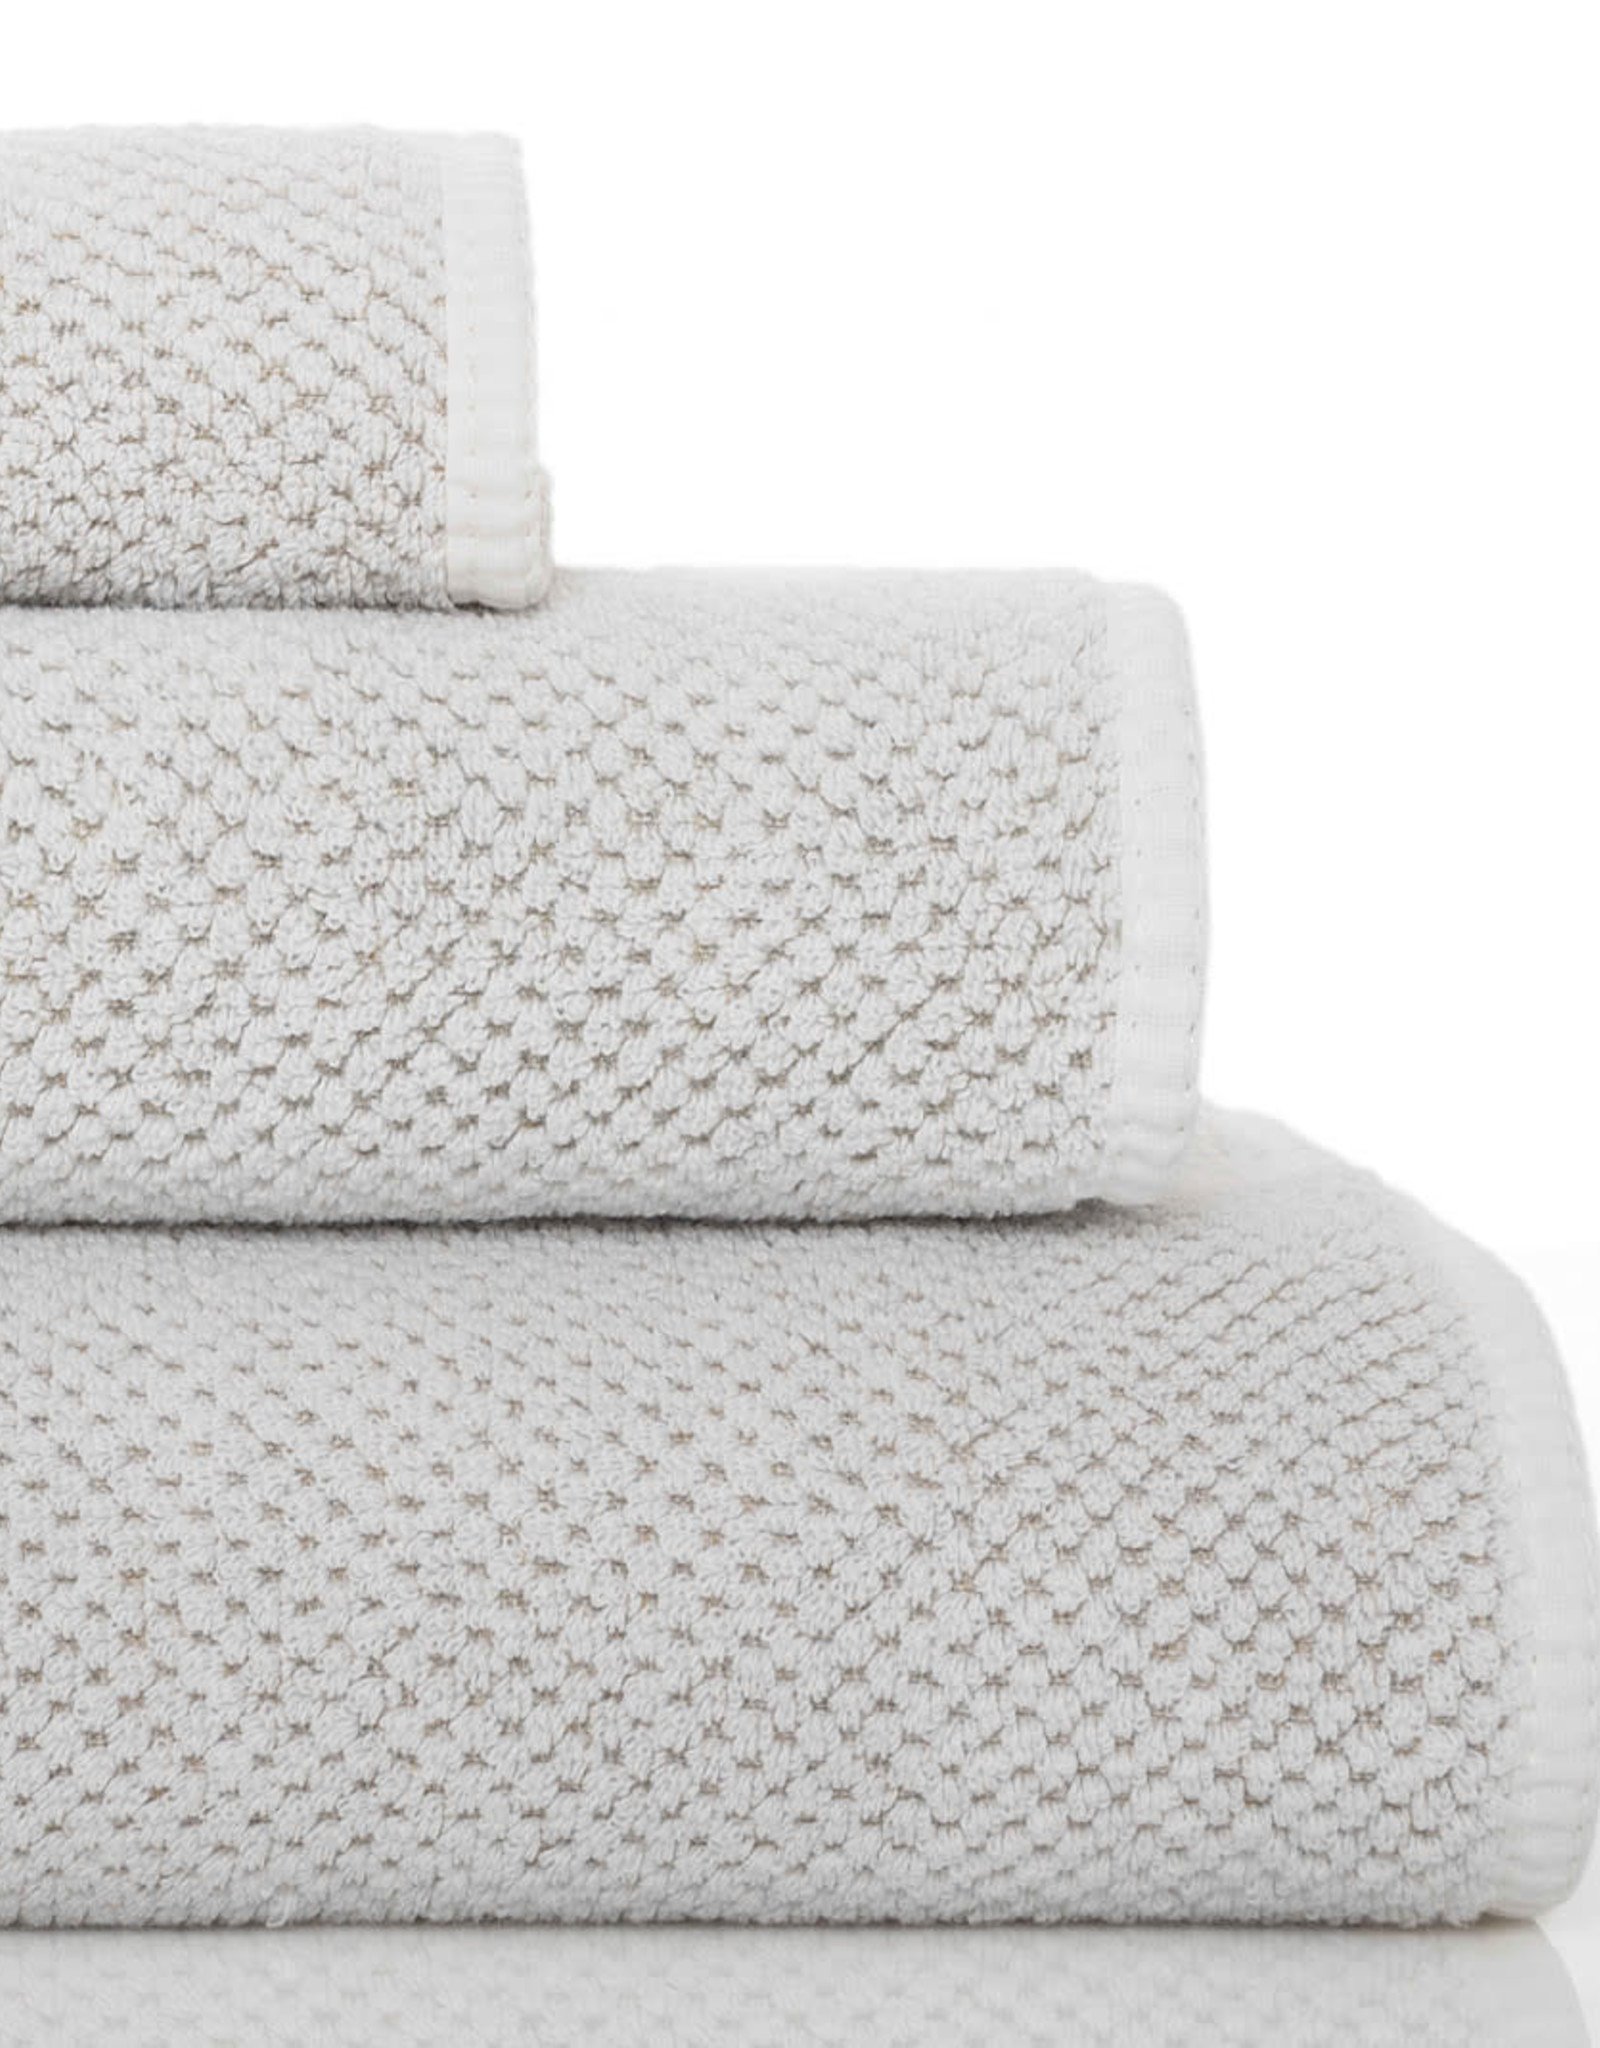 French Linen + Cotton XL Waffle Compact Bath Towel - Optic White - 24 x 40  - The Foundry Home Goods